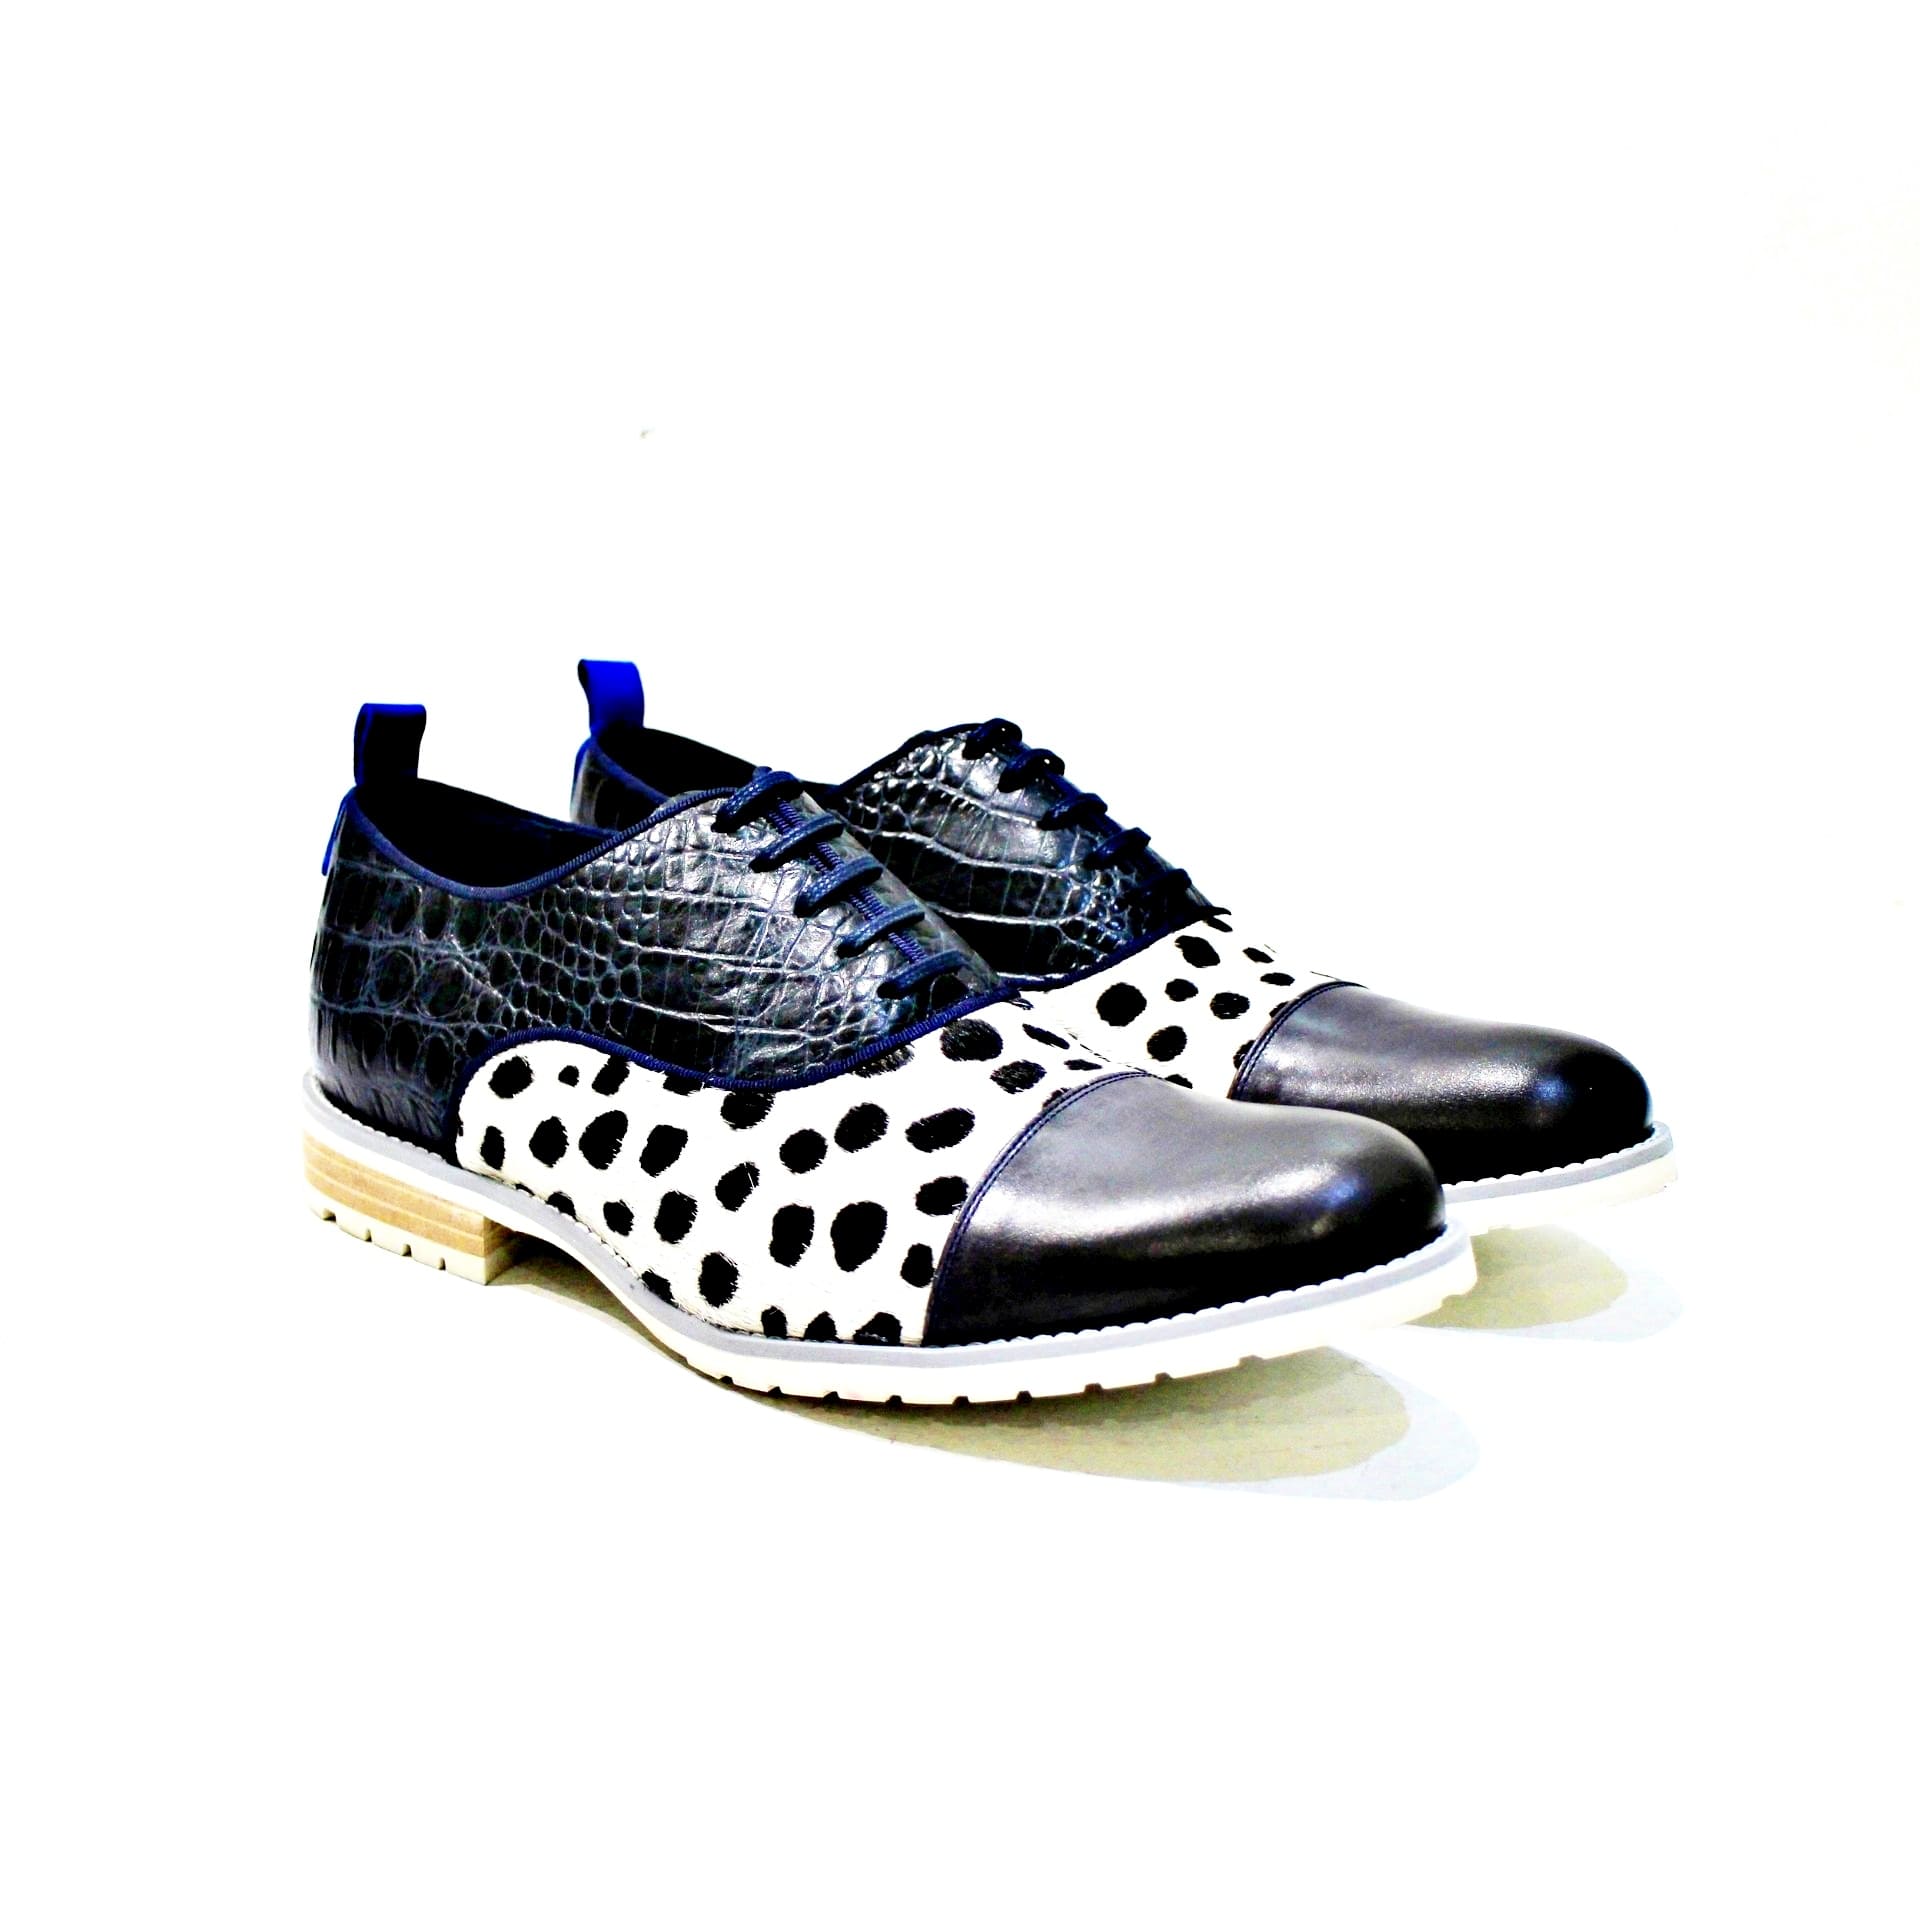 Shoe consisting of hair and leather, leather lining, rubber sole, with an exclusive design. Icon Model “Walk with Pintta”